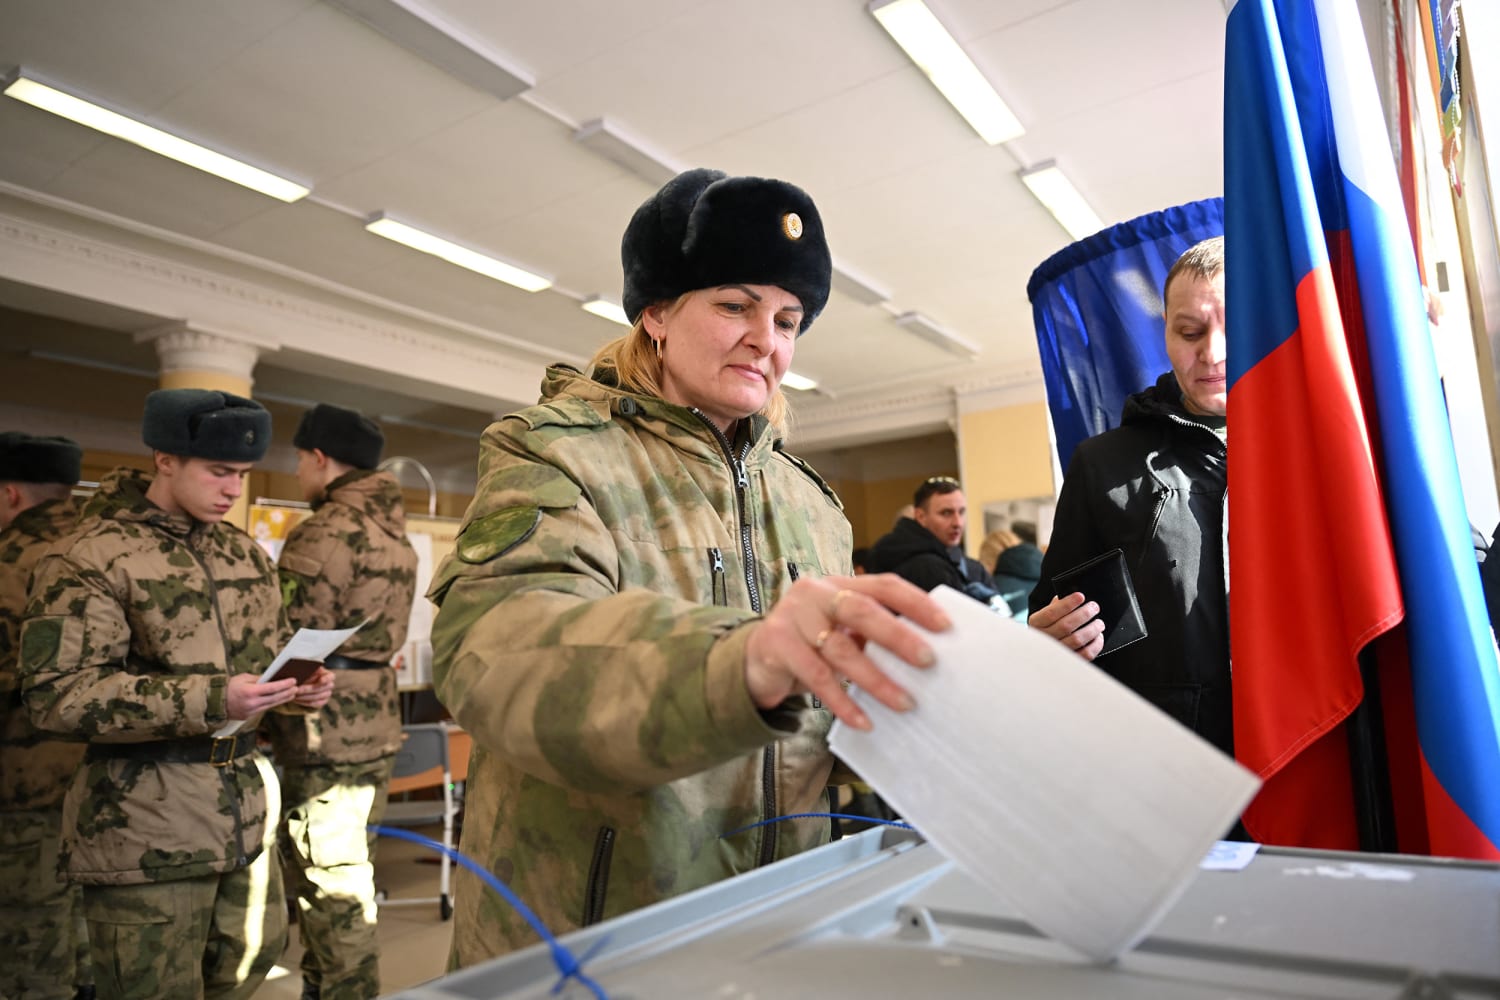 In the vote inside Moscow, Putin will win without opposition